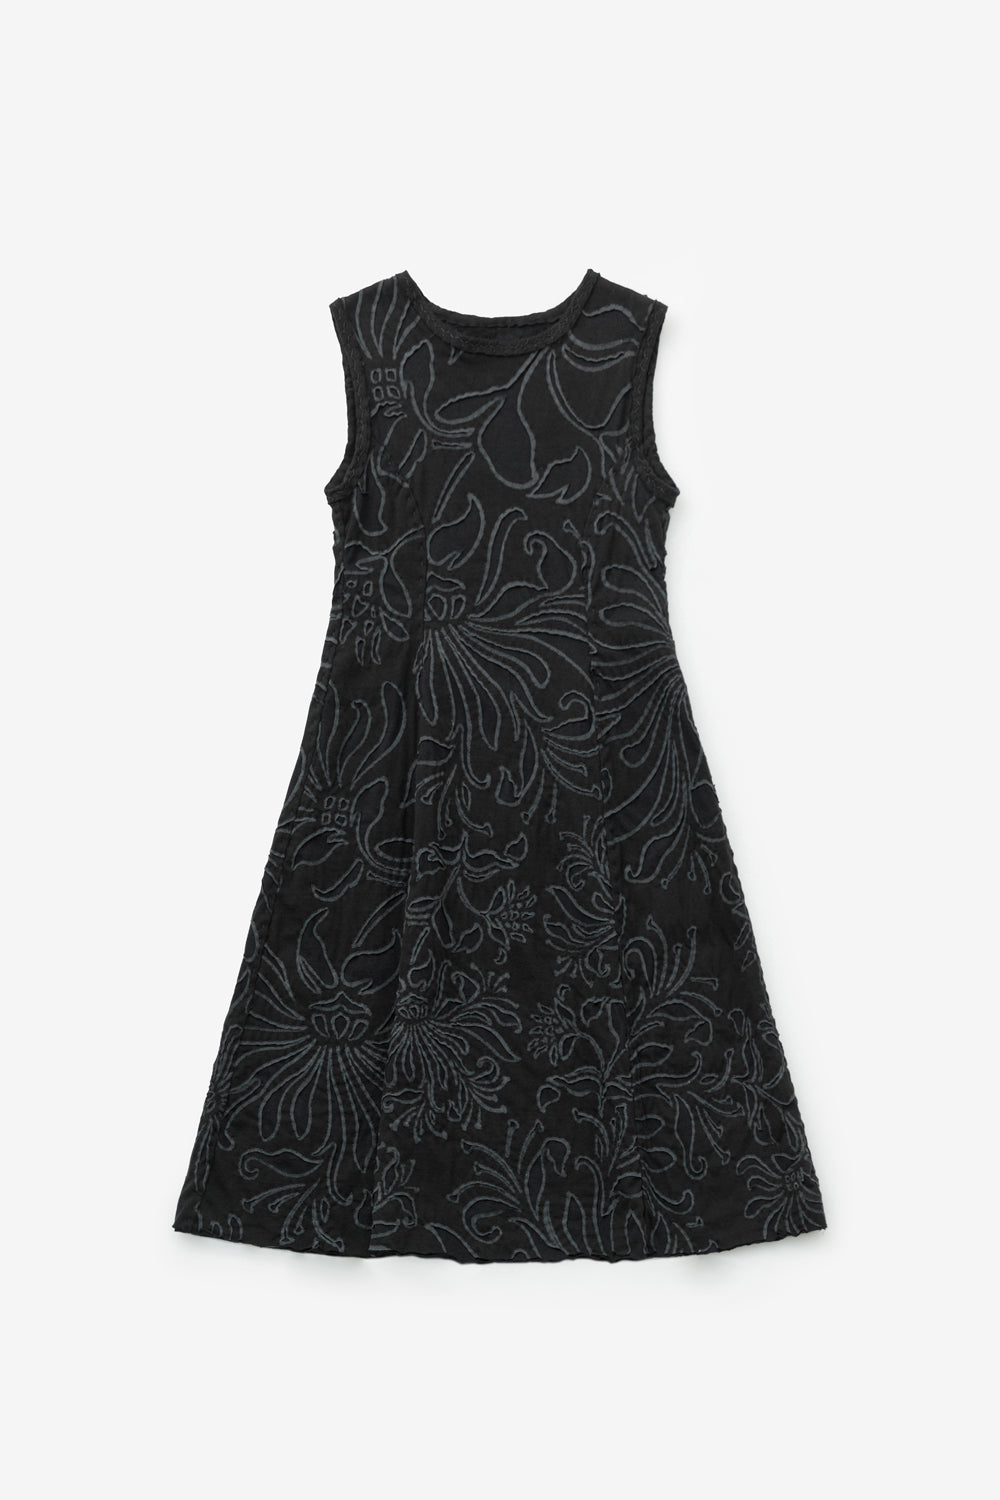 The Factory Dress in black with floral Magdalena stencil. 